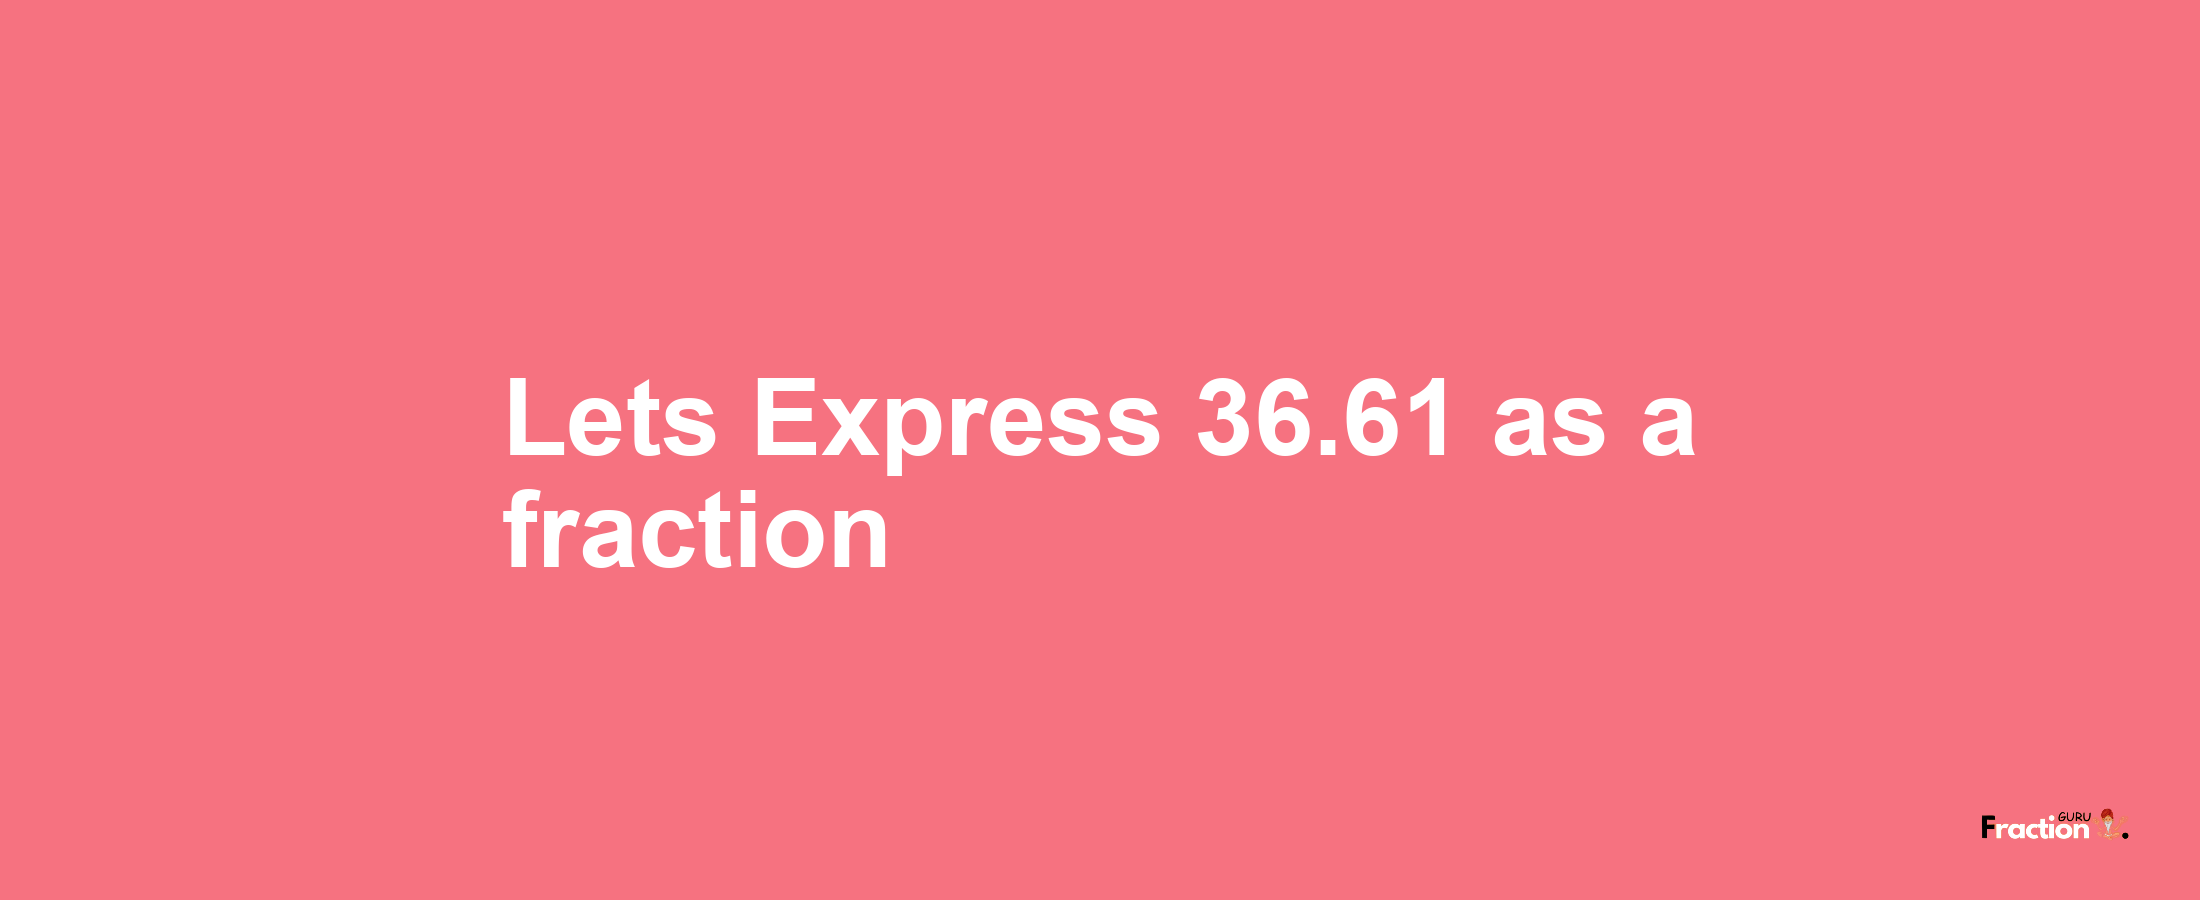 Lets Express 36.61 as afraction